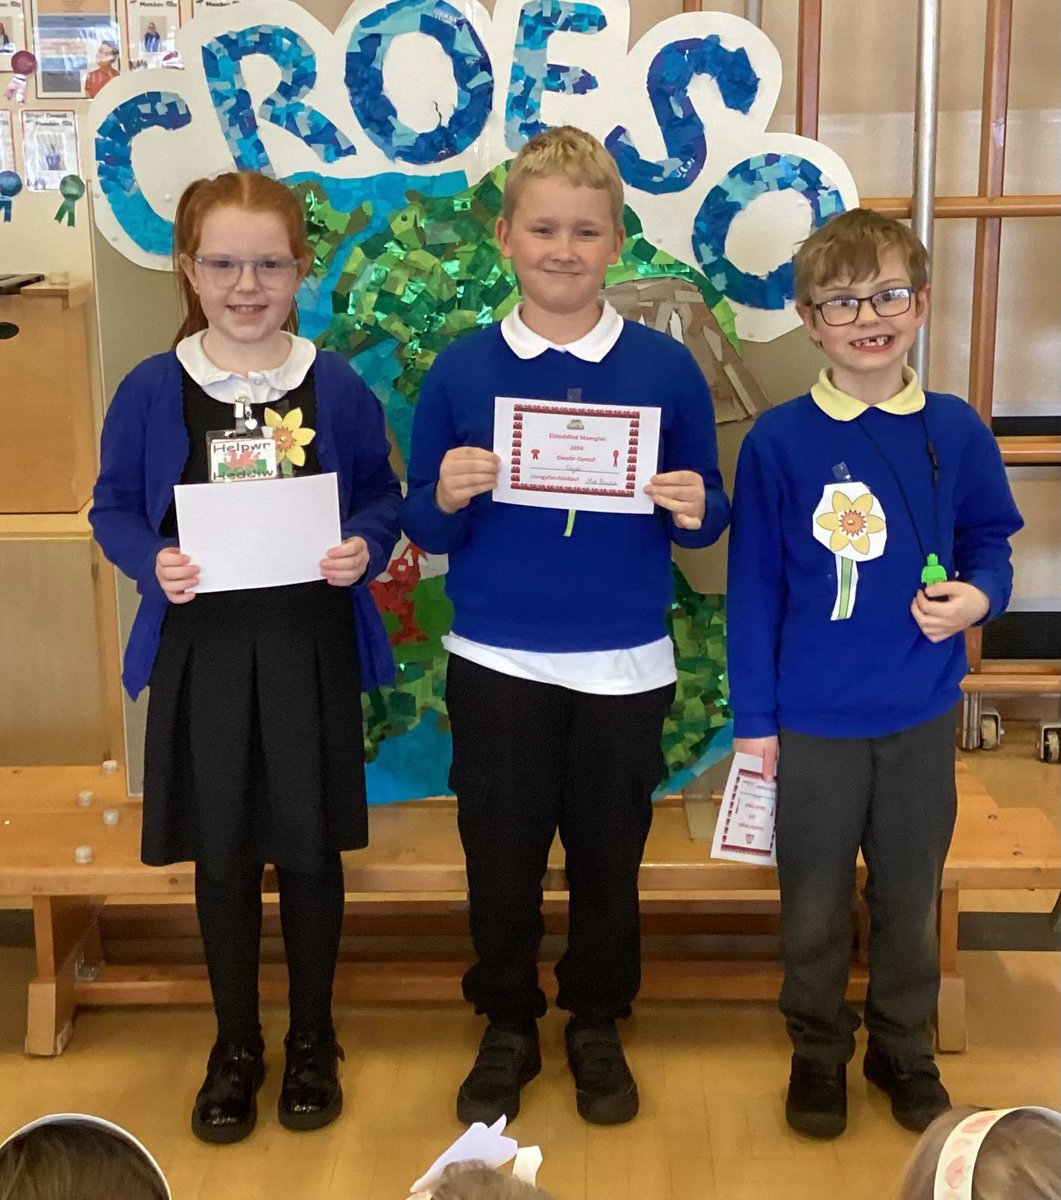 Da iawn to these superstars who won 1st, 2nd and 3rd in the poetry and artwork competition for our Eisteddfod! They have all worked super hard & have enjoyed celebrating St David’s Day #DyddGwylDewiHapus 🏴󠁧󠁢󠁷󠁬󠁳󠁿 @YsgolMaesglas